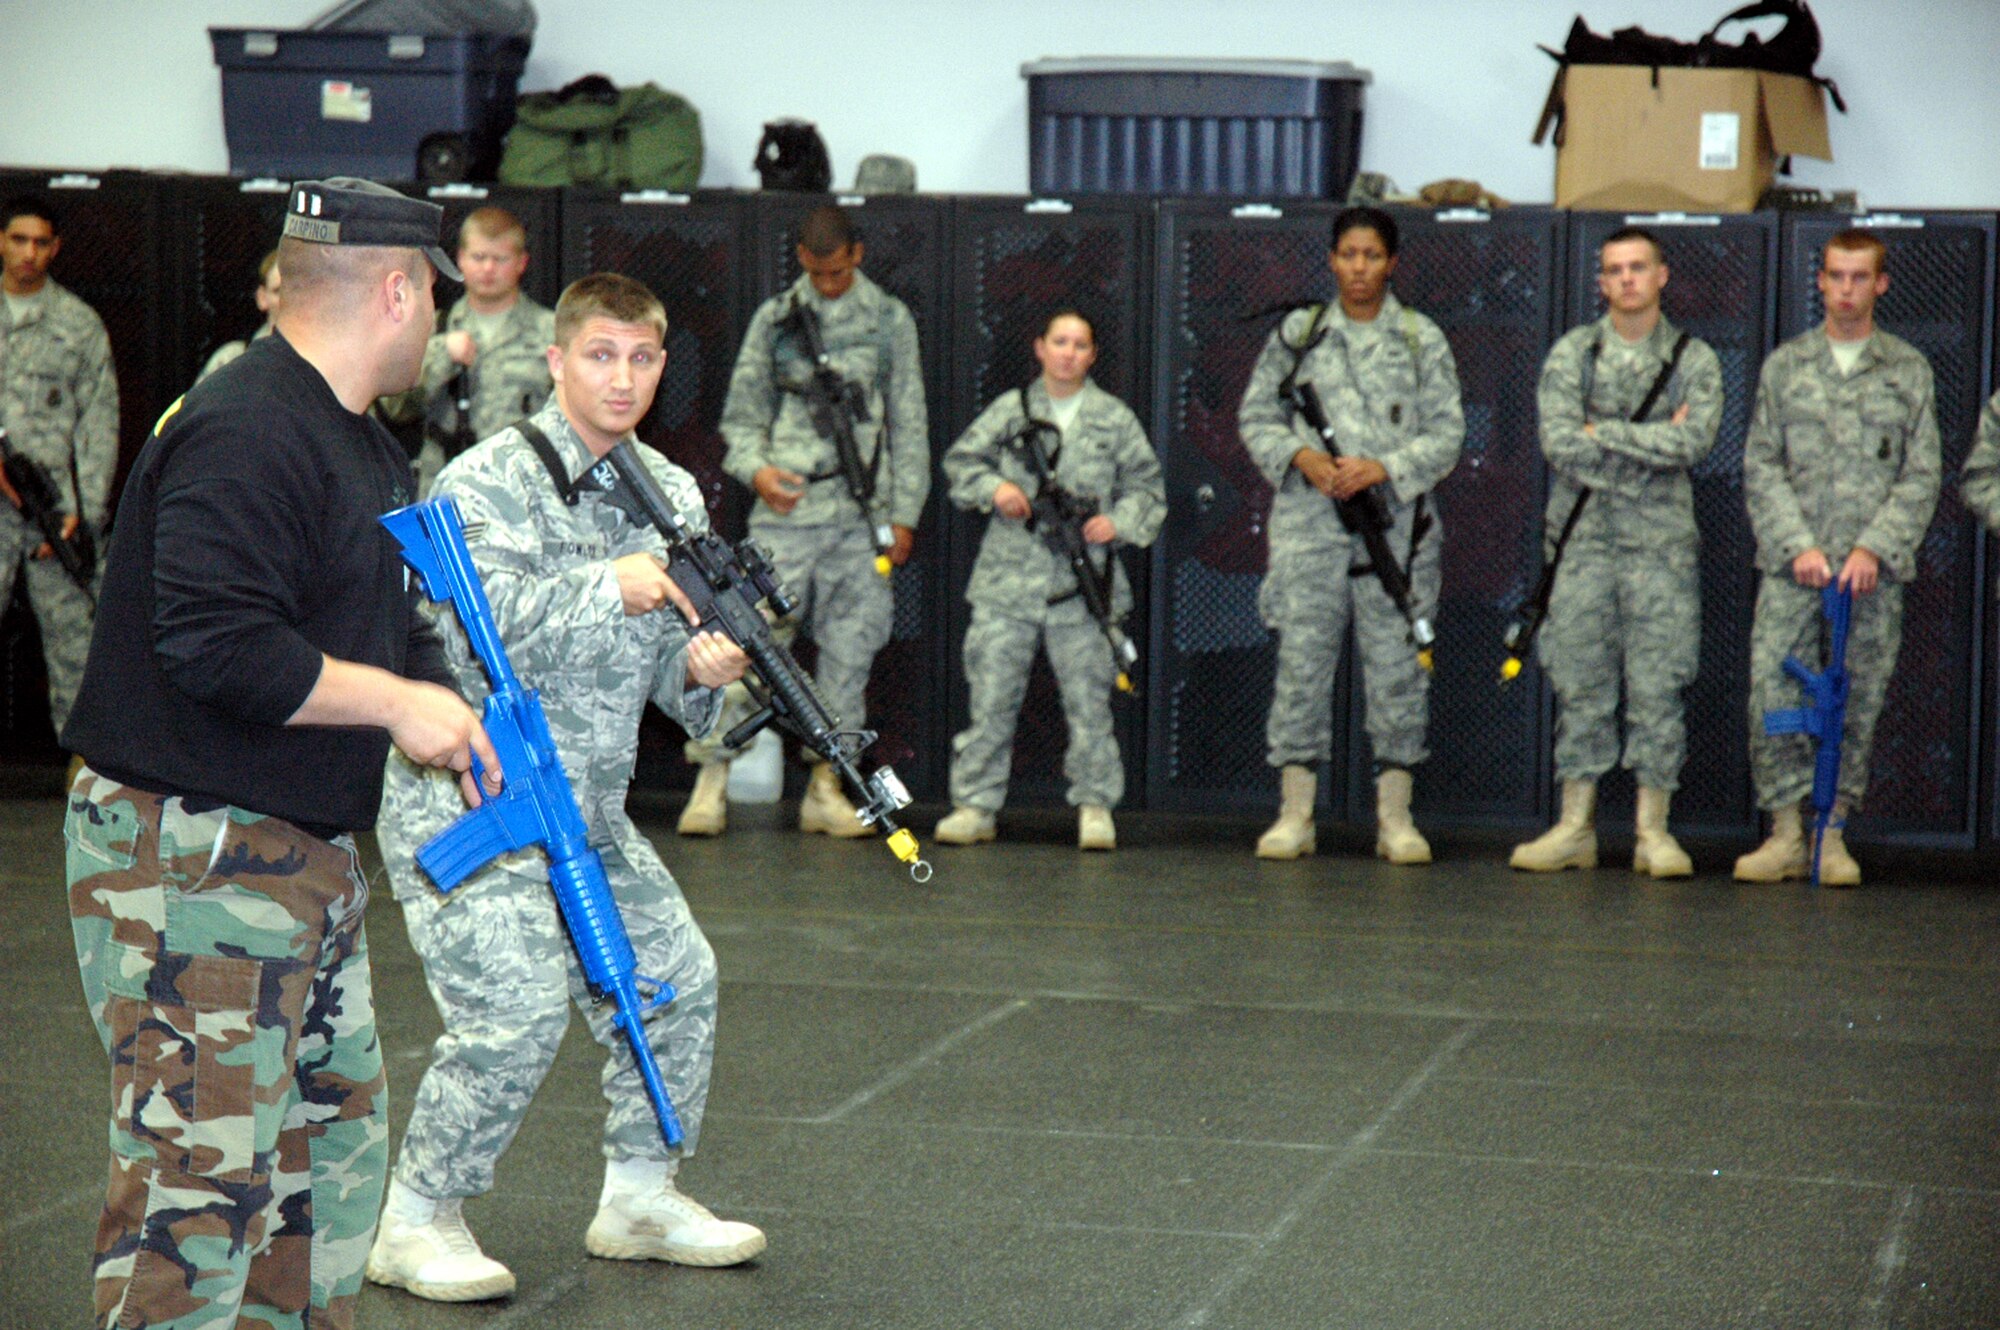 Instructor Staff Sgt. Thomas Carpino of the 421st Combat Training Squadron works with students in the Air Force Phoenix Warrior Training Course during "tape drills" for training in mobile operations in urban terrain in the U.S. Air Force Expeditionary Center June 19, 2008, on Fort Dix, N.J.  The course, taught by the USAF EC's Expeditionary Operations School and the 421st CTS, prepares security forces Airmen for upcoming deployments.  (U.S. Air Force Photo/Tech. Sgt. Scott T. Sturkol)